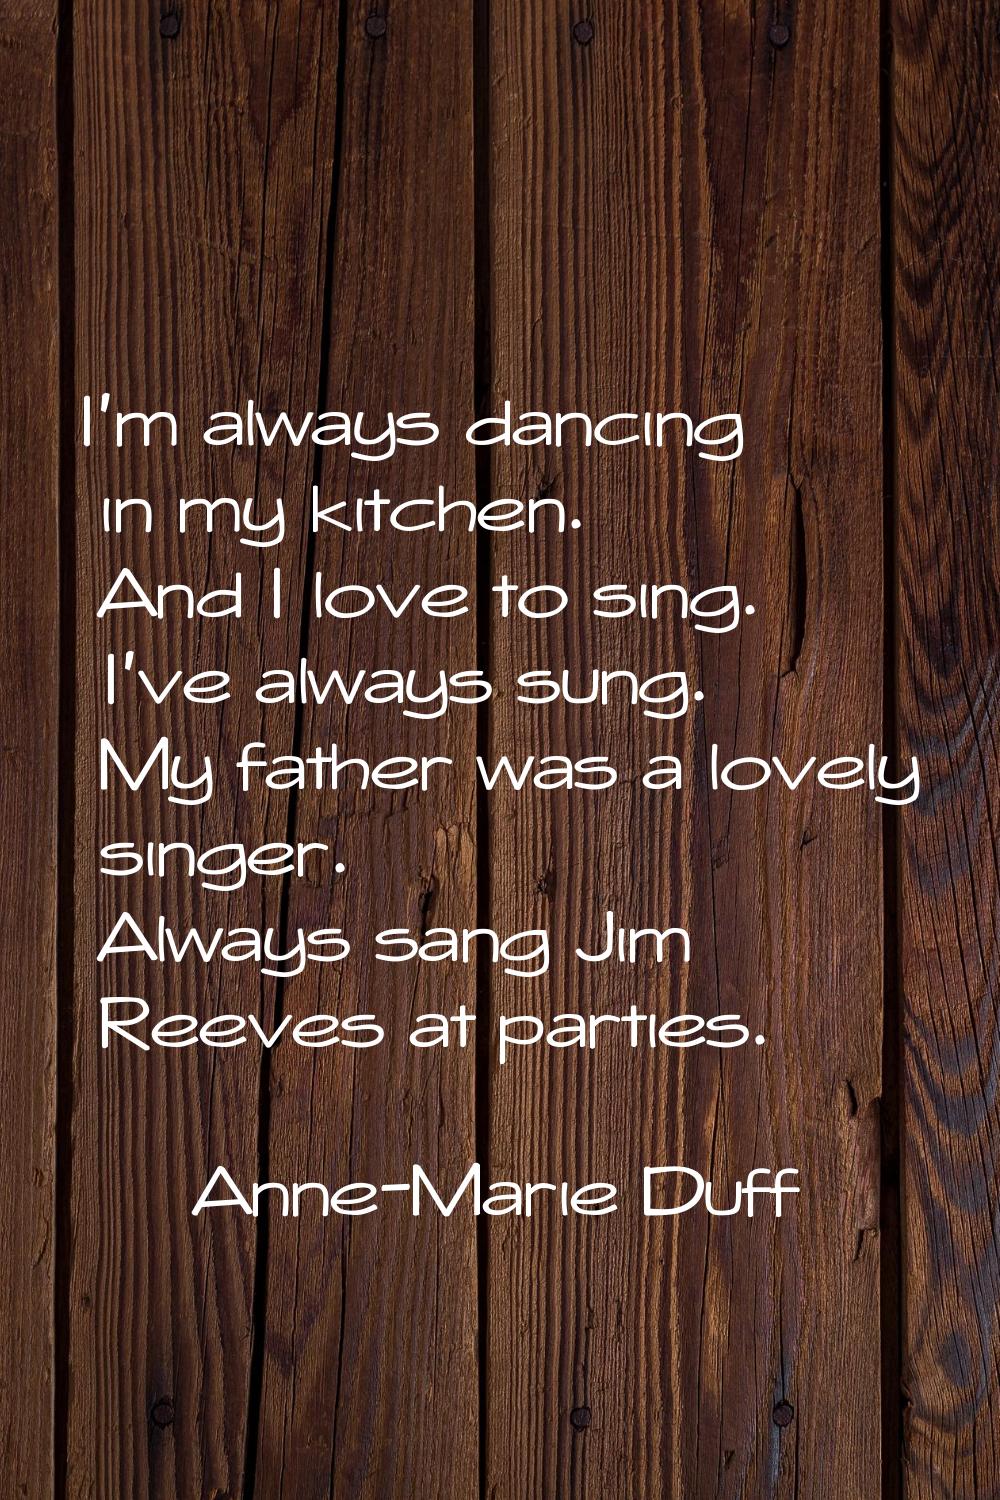 I'm always dancing in my kitchen. And I love to sing. I've always sung. My father was a lovely sing